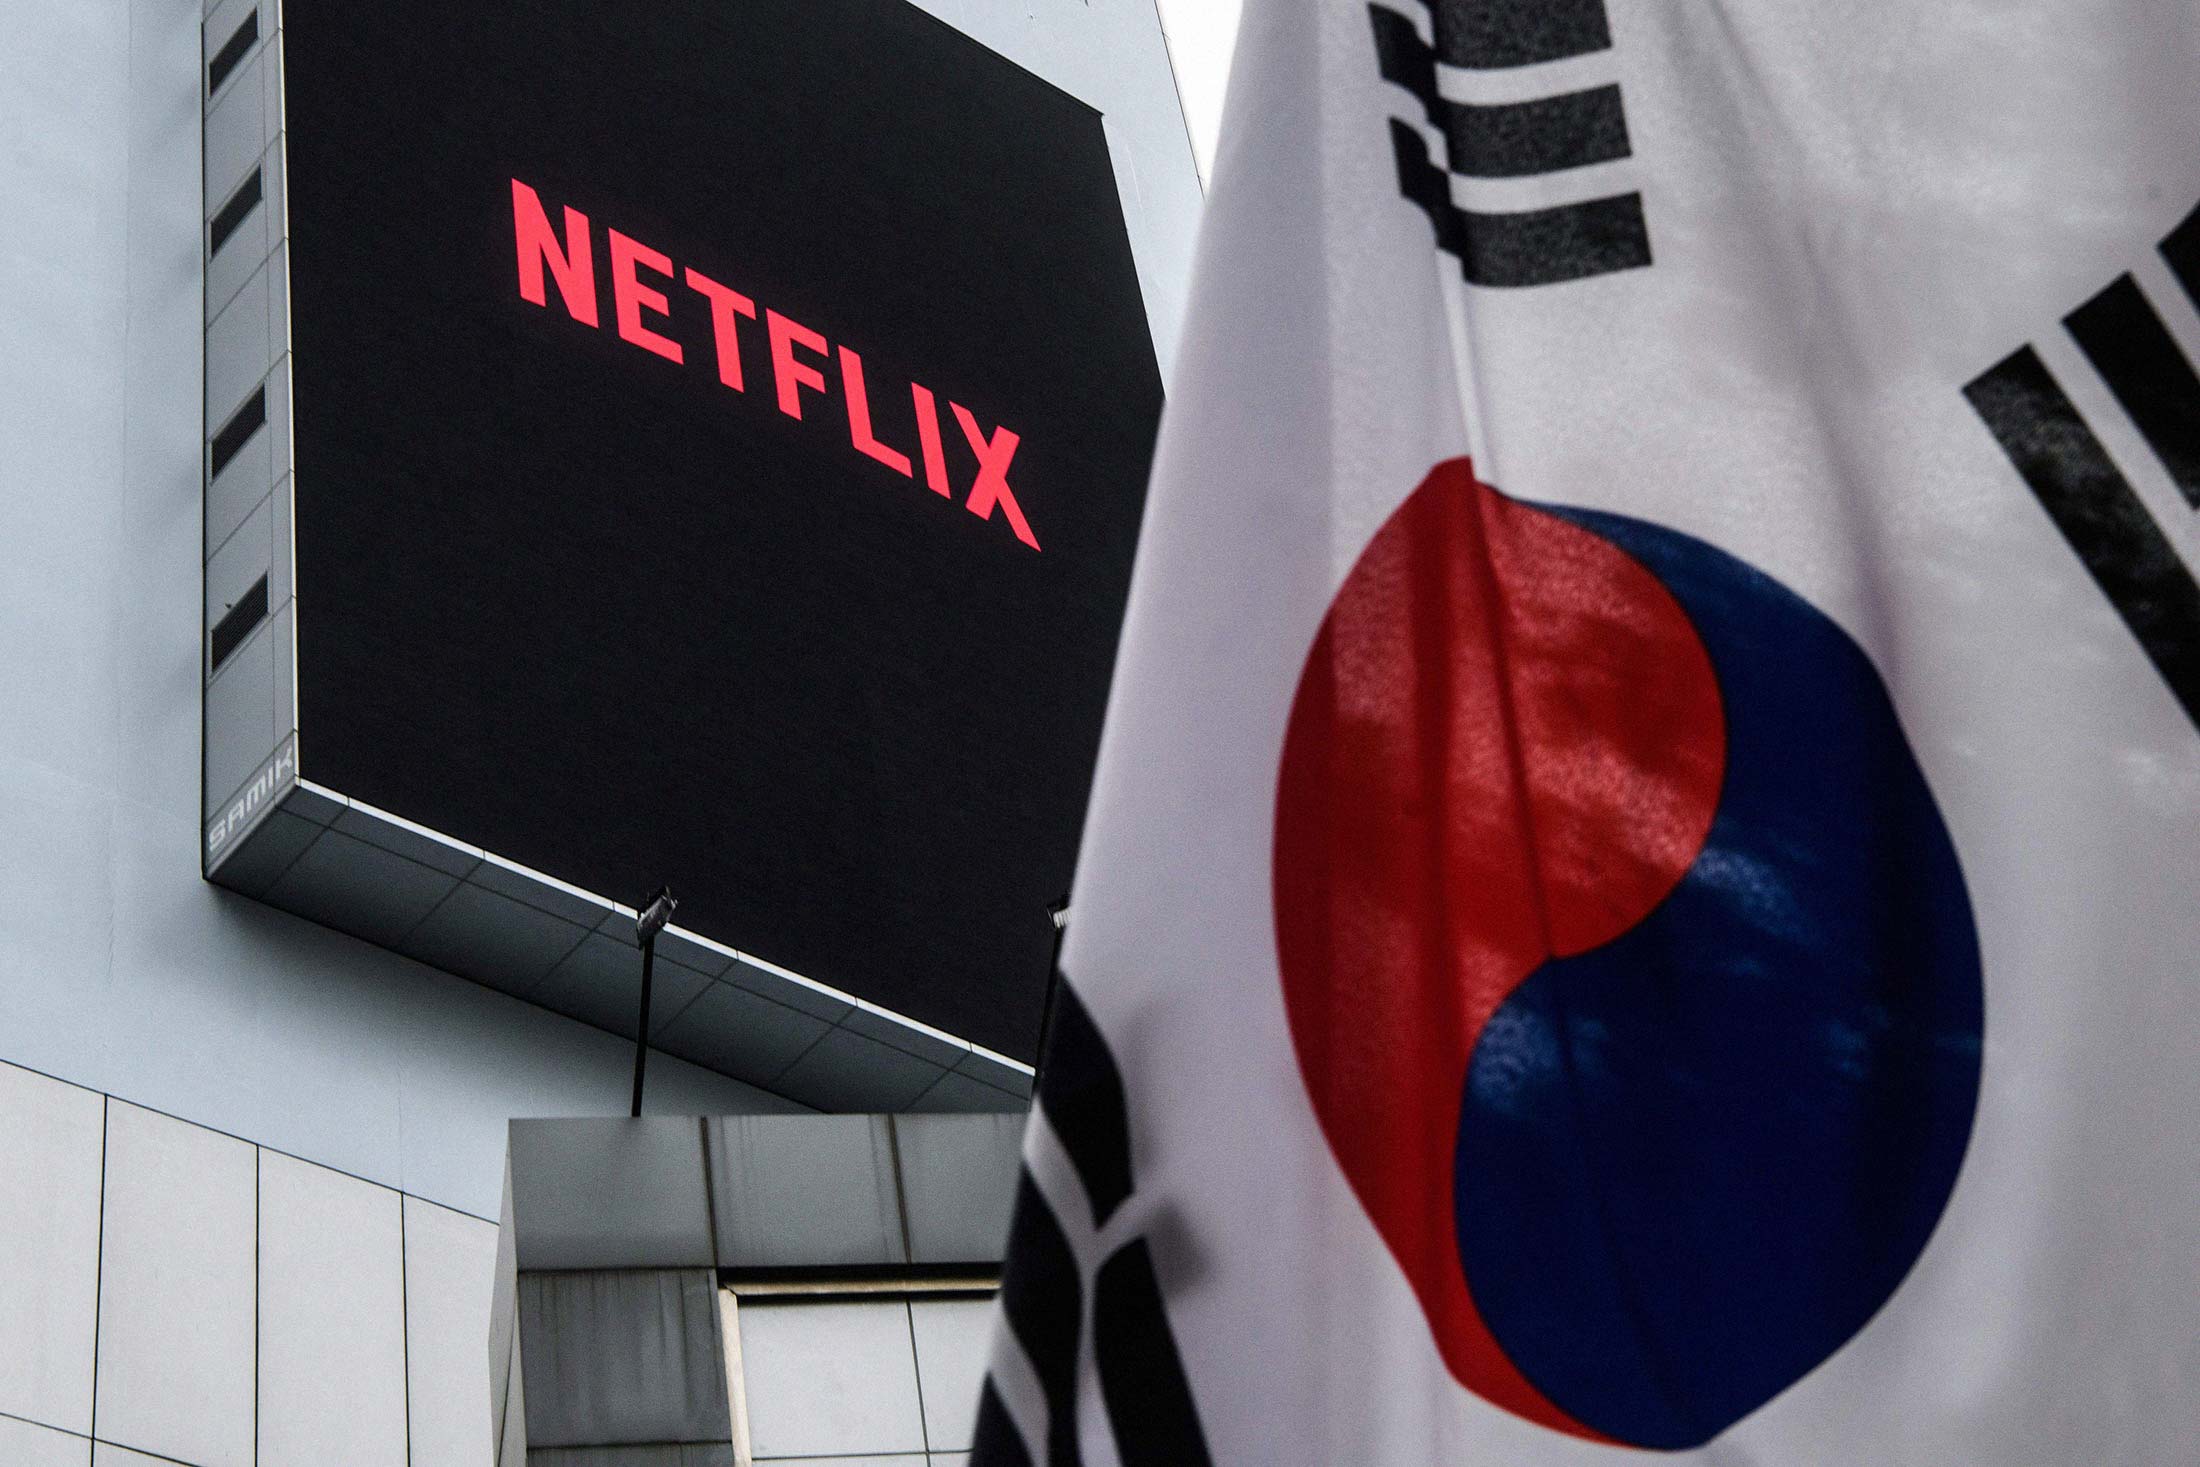 How To Watch Korean Netflix from Anywhere